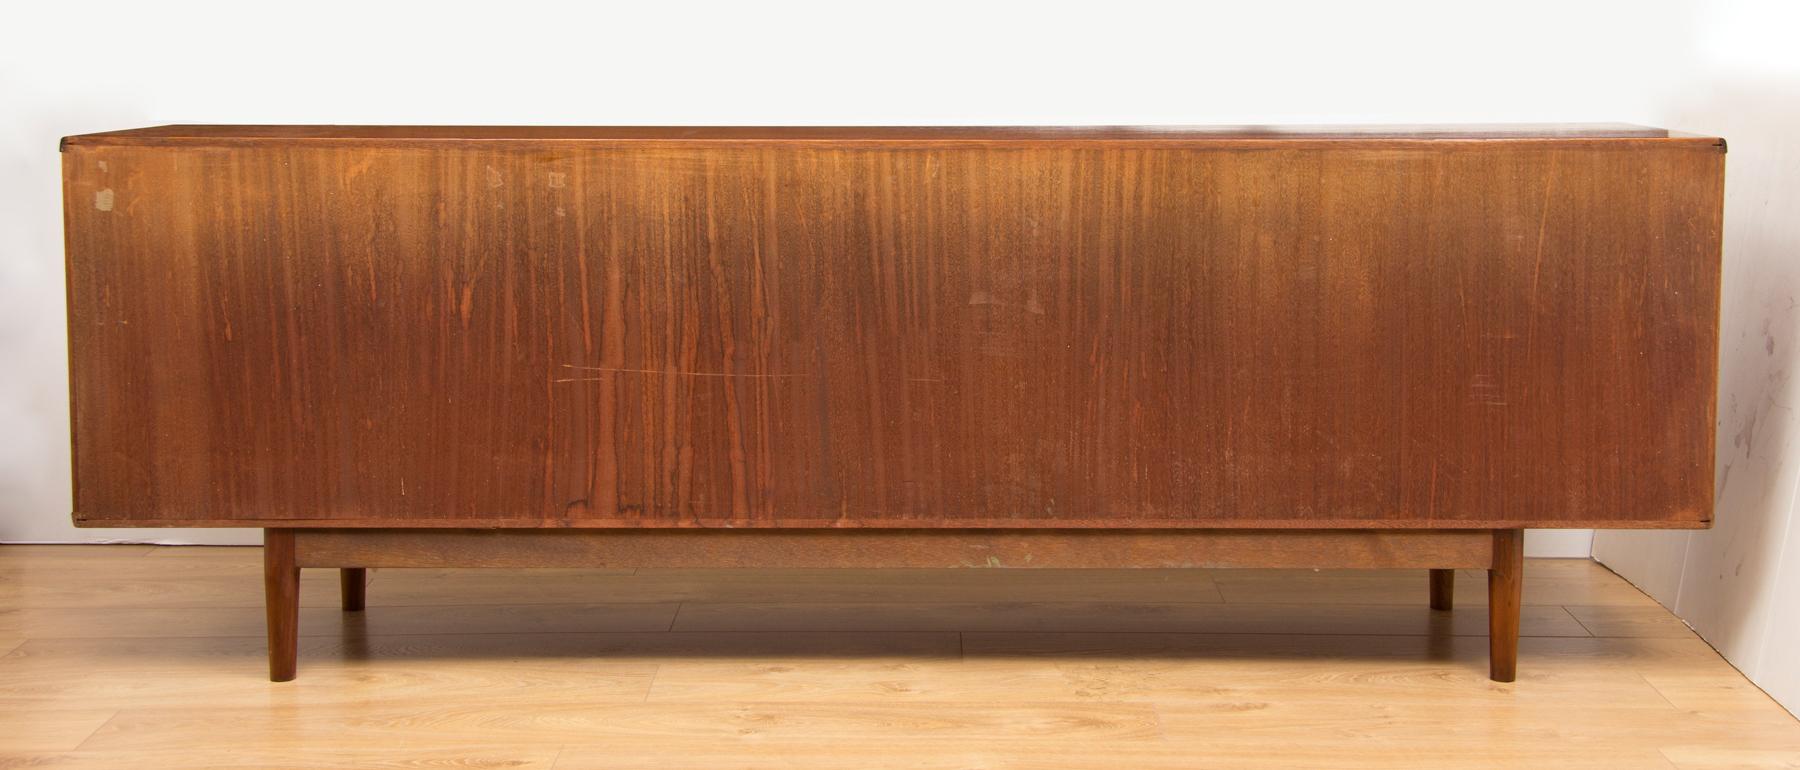 Christian Linneberg Rosewood Danish Sideboard, circa 1960 In Good Condition For Sale In Surbiton, GB